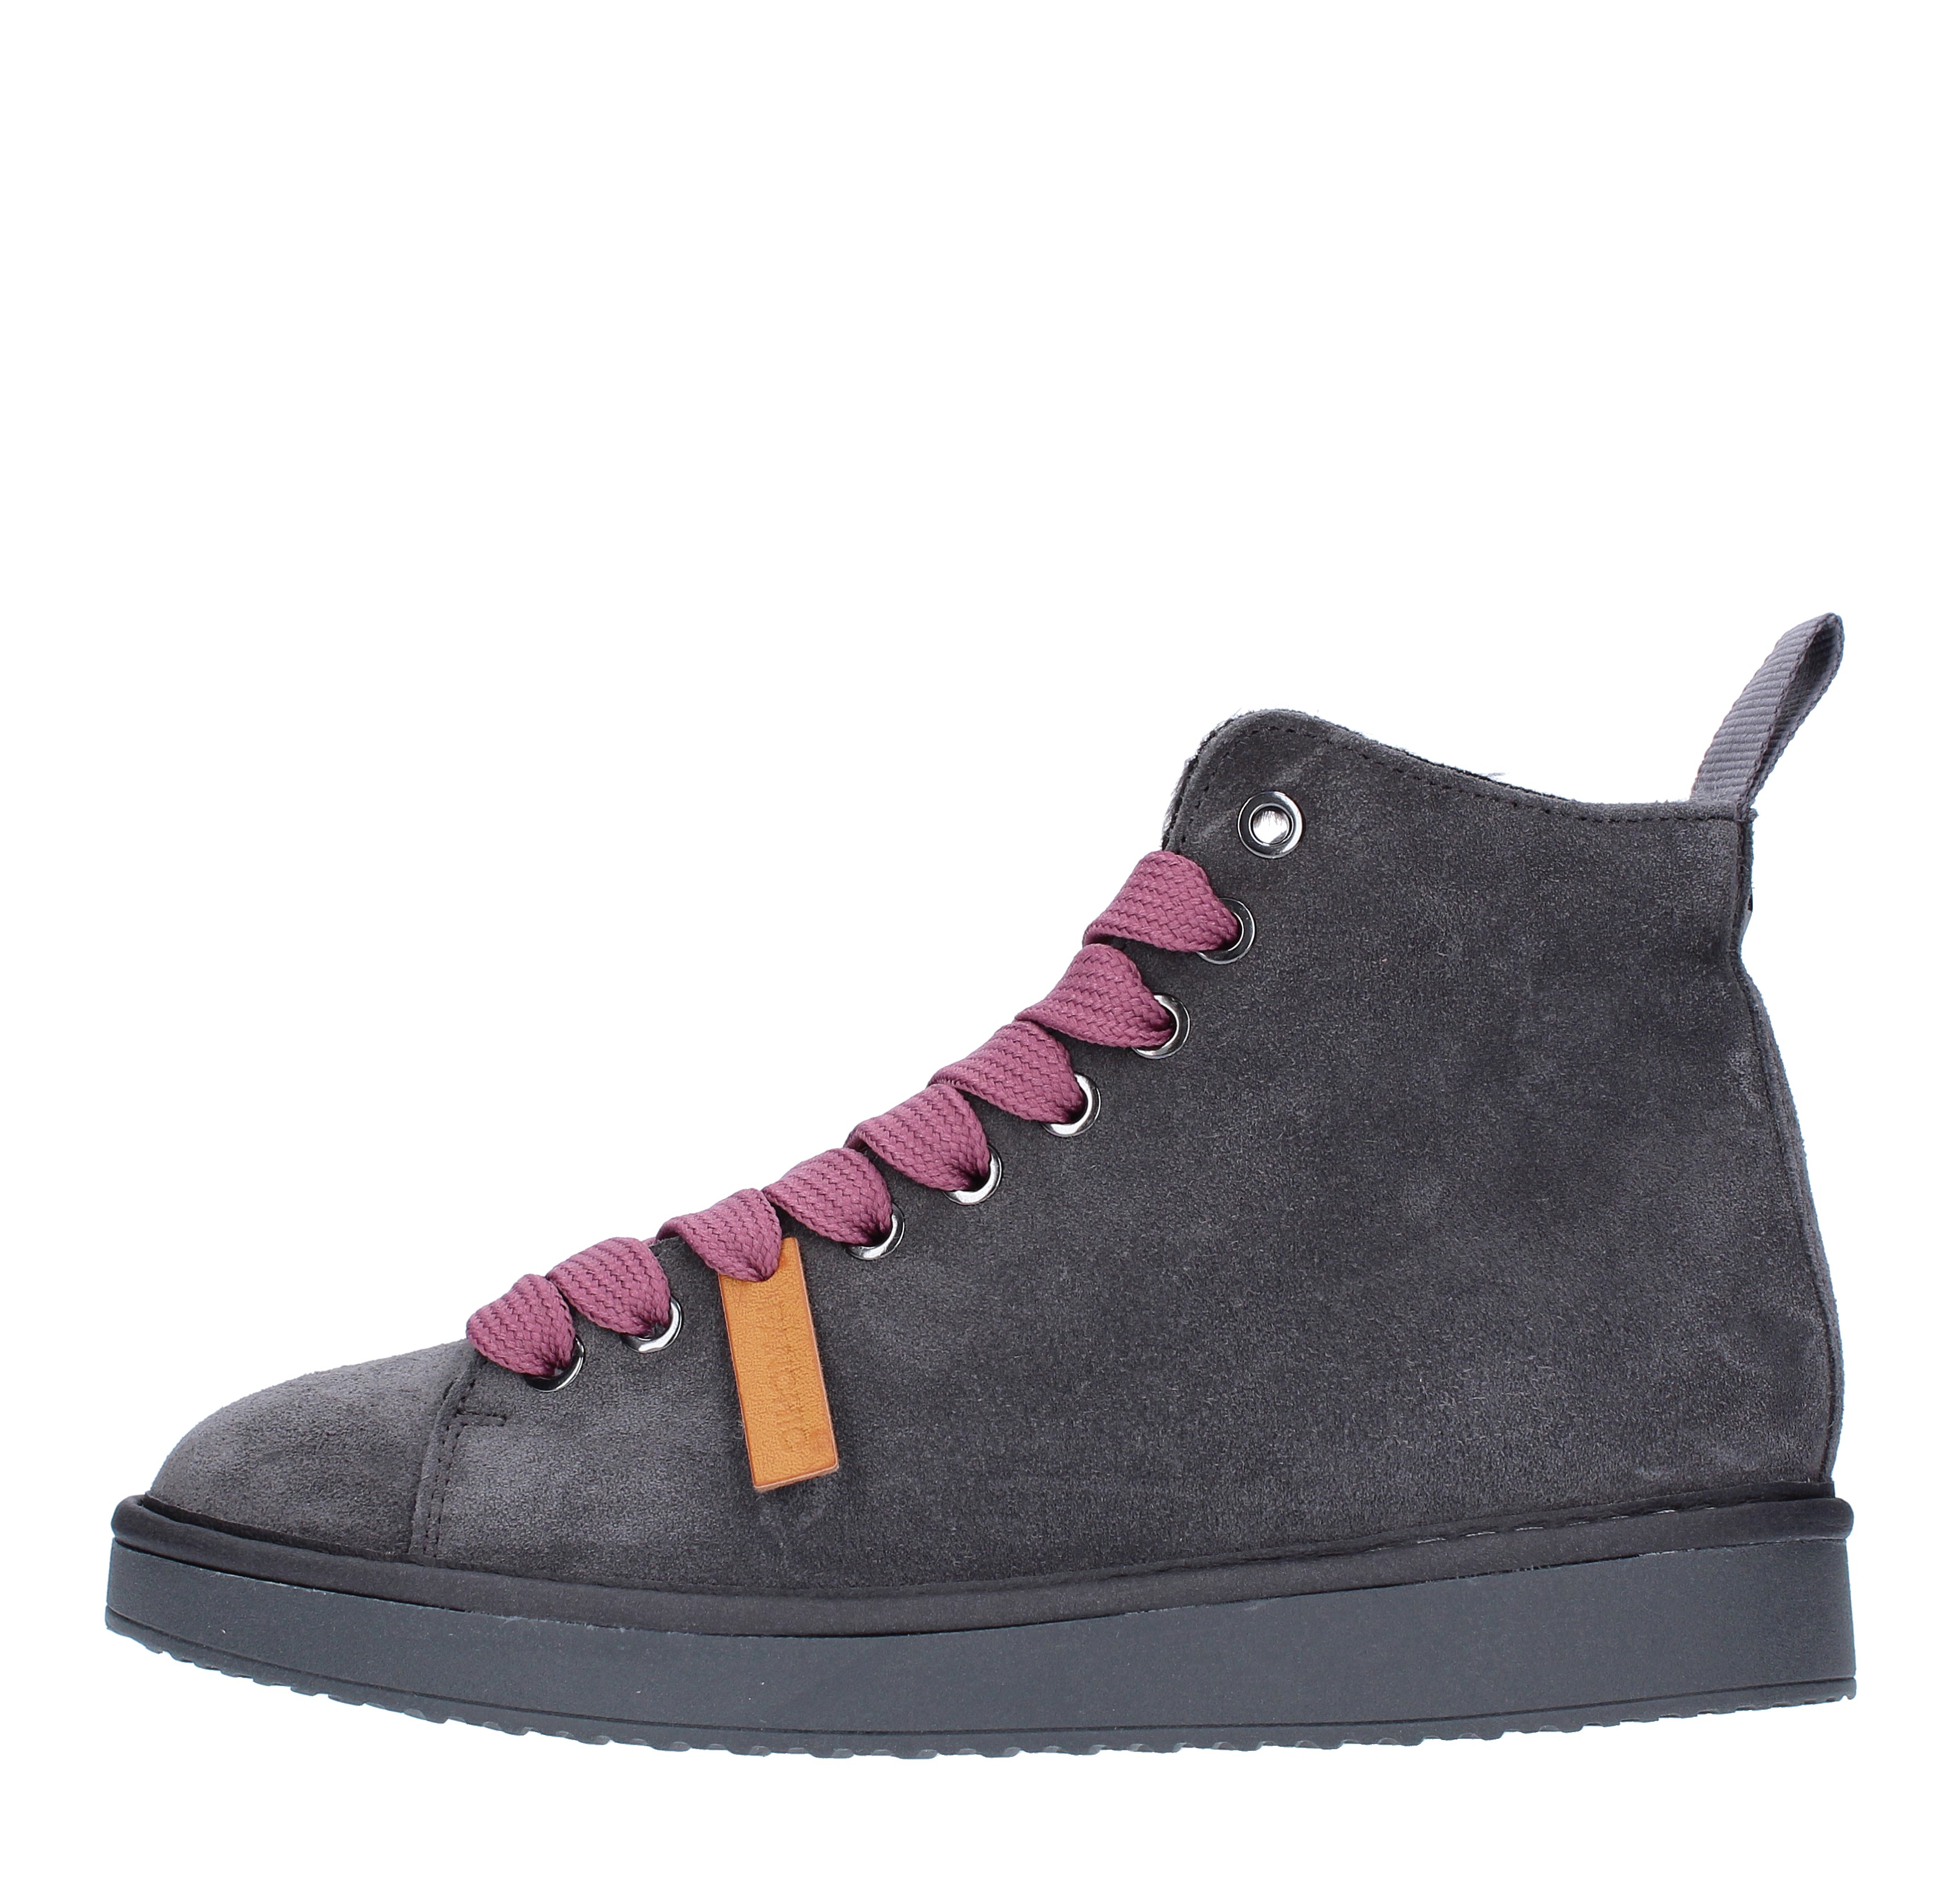 P01 ANKLE BOOT PANCHIC high trainers in suede and faux fur - PANCHIC -  Ginevra calzature